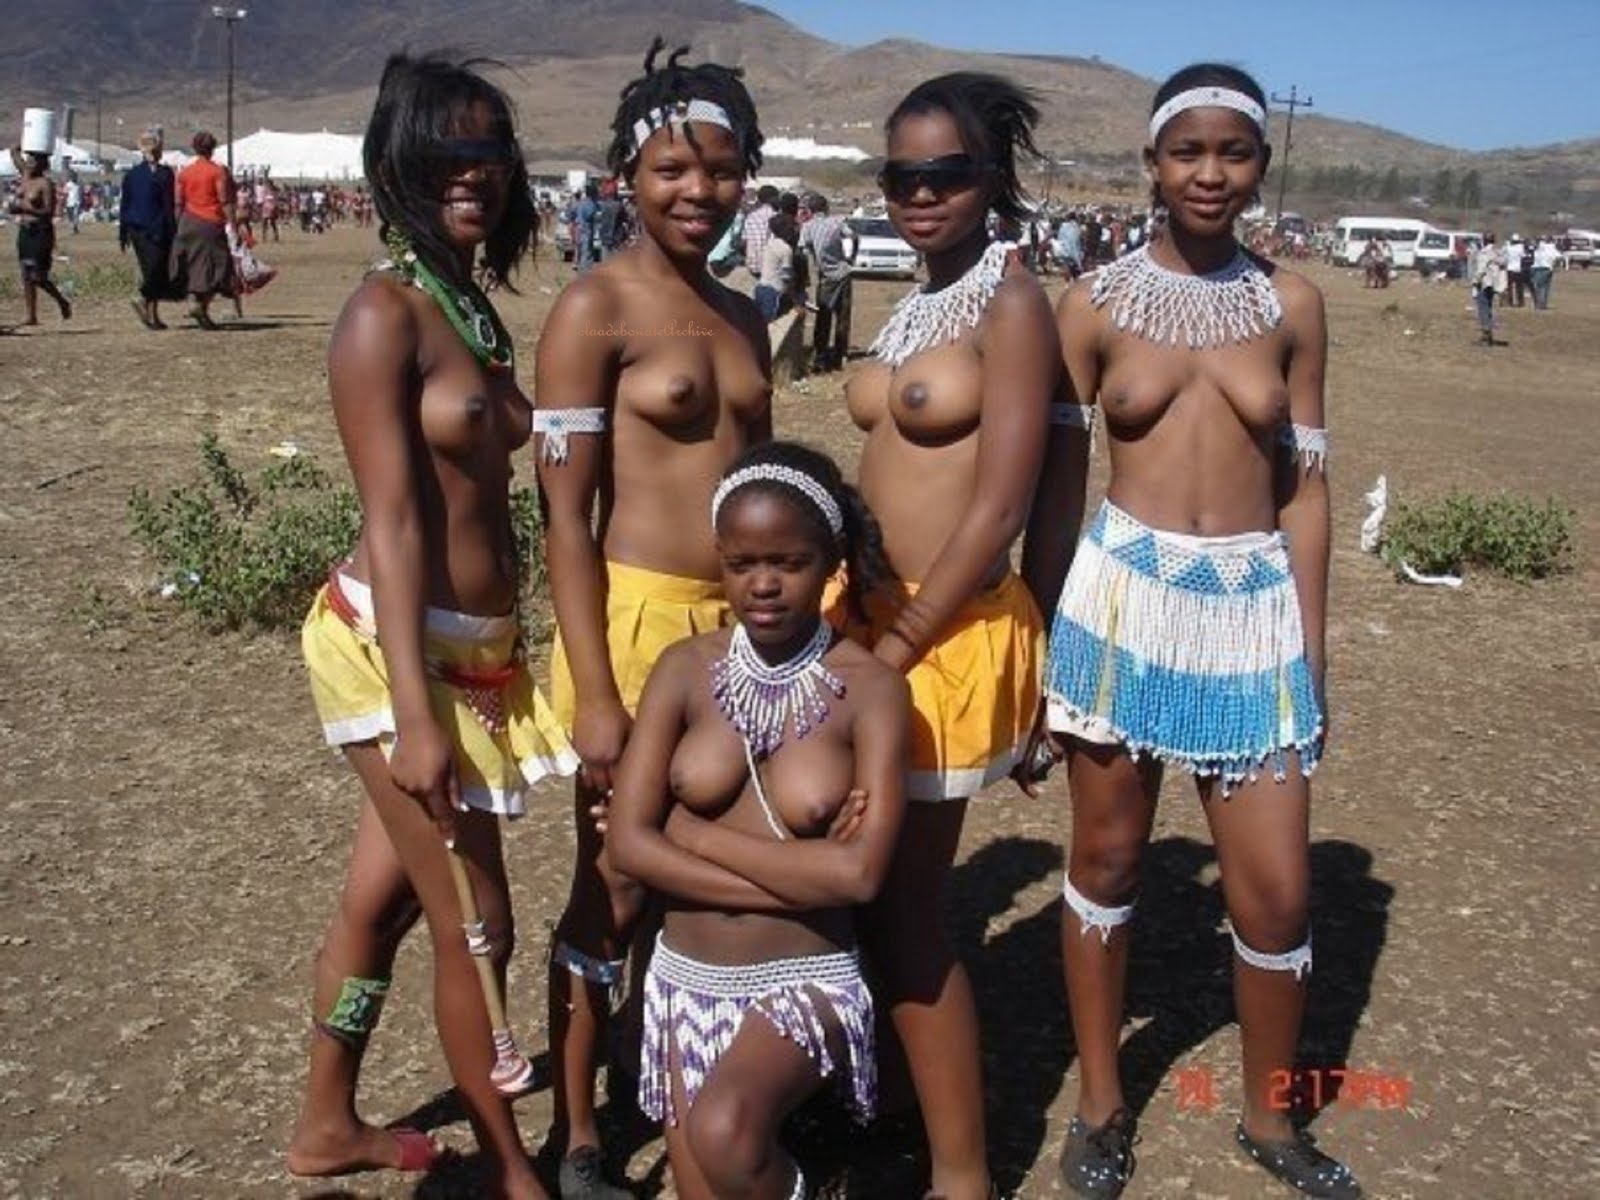 Xxx africa tradition images